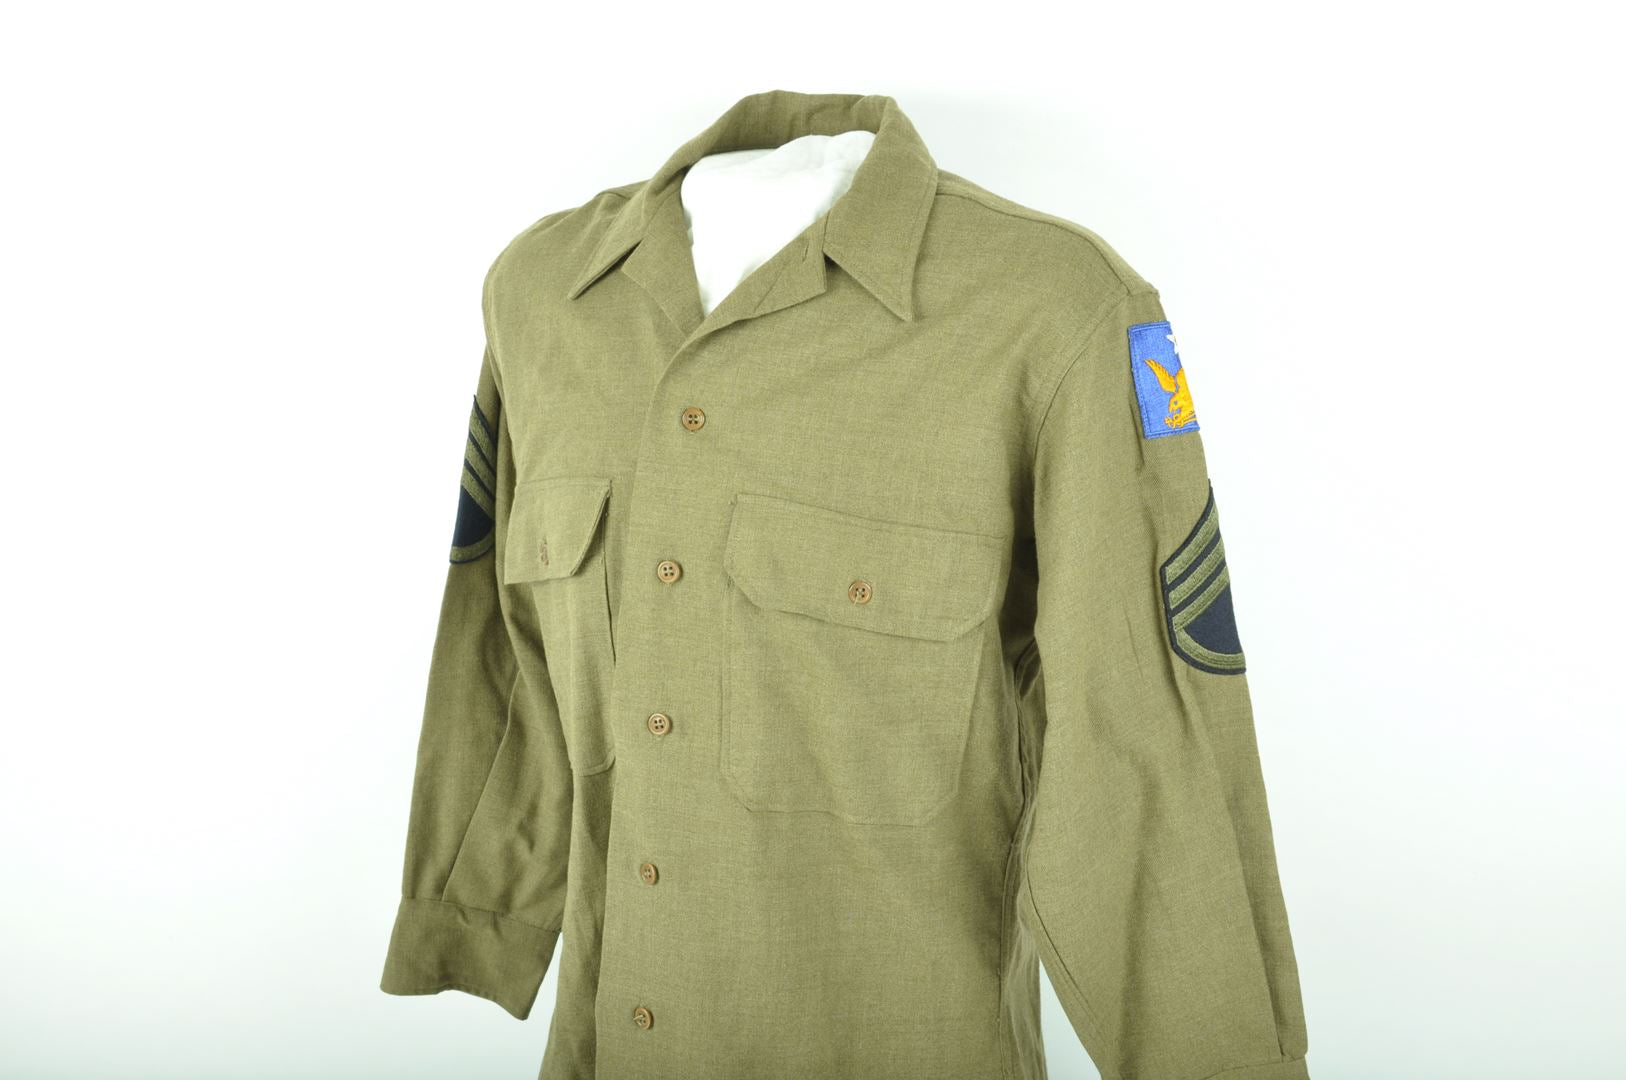 Chemise "moutarde" / Patch 2nd Army Air Force